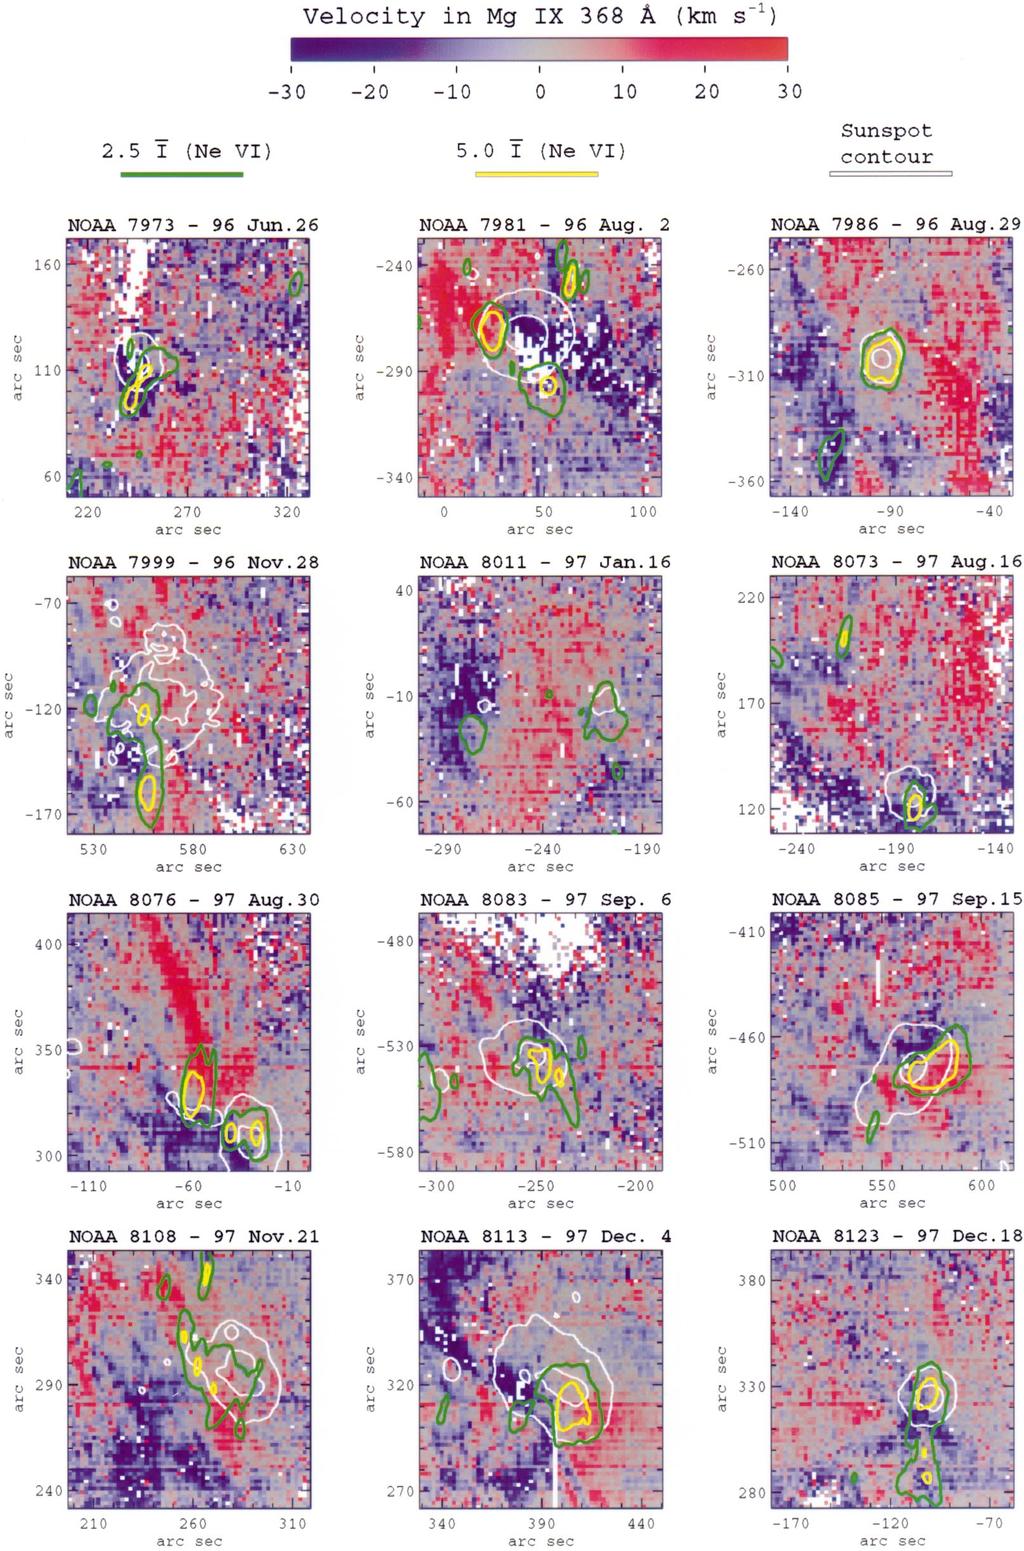 No. 1, 1998 FLOWS IN SUNSPOT PLUMES L89 Fig. 4. Spatial distribution of the relative line-of-sight velocity in Mg ix l368. The velocities are measured relative to the average velocity in each image.